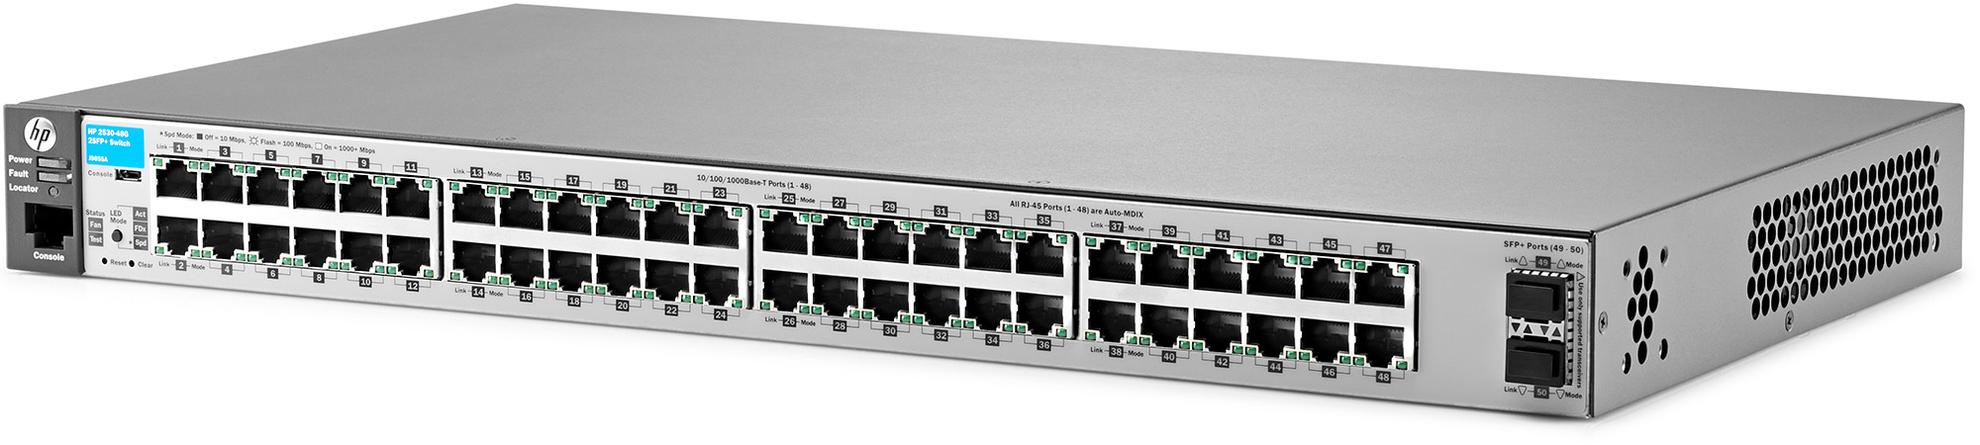 HP 2530 48G MANAGED SWITCH